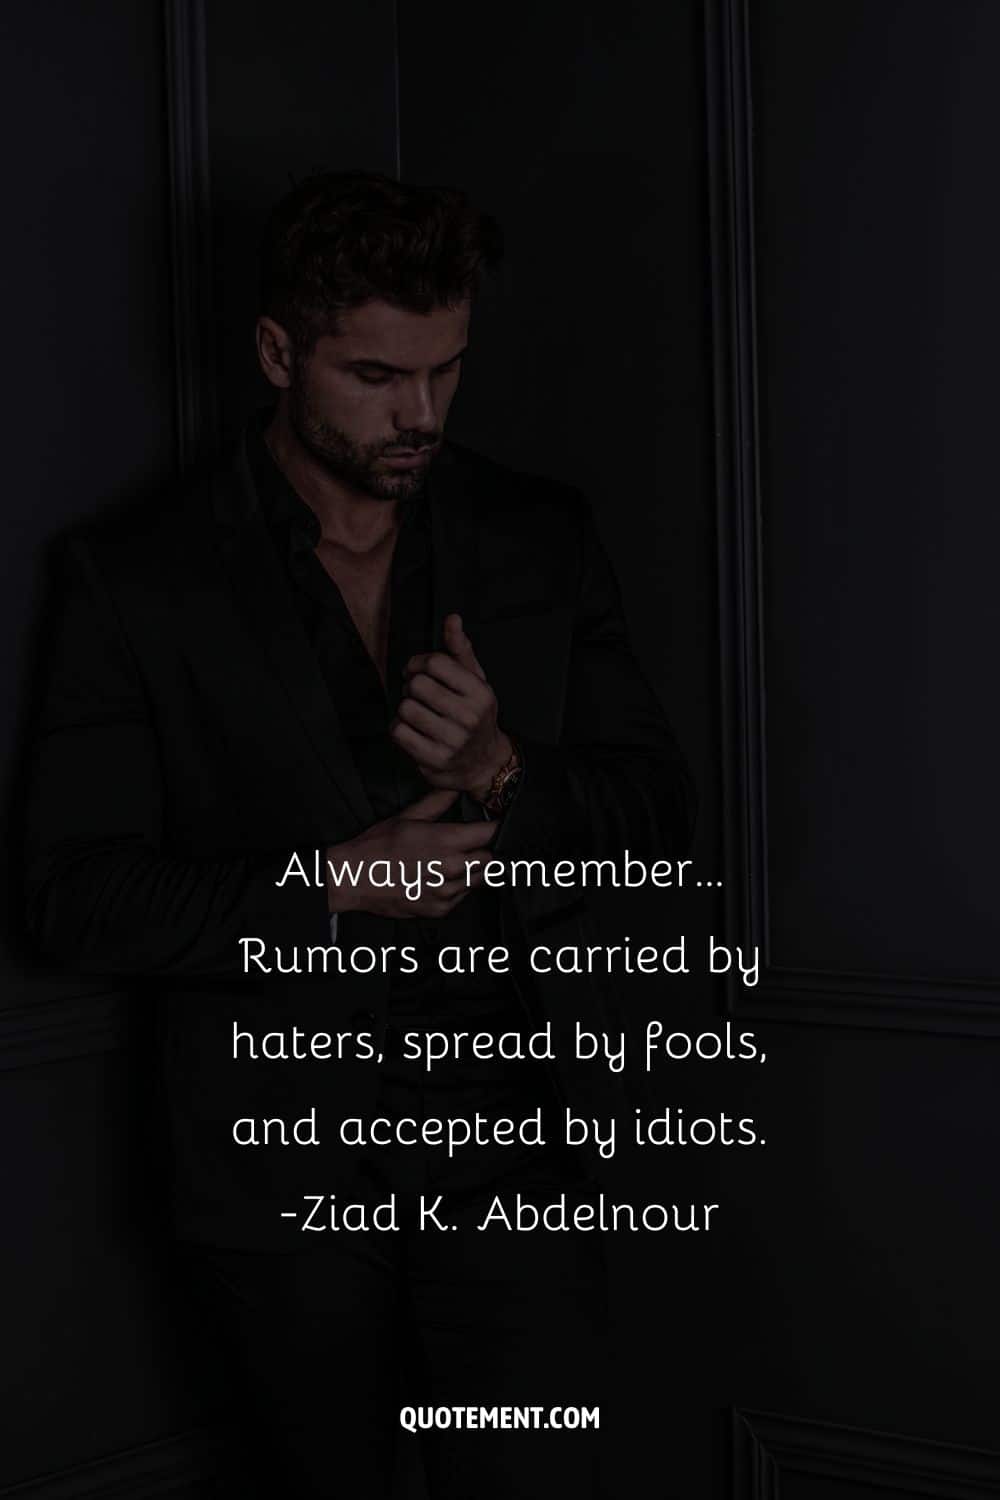 Rumors are carried by haters, spread by fools, and accepted by idiots